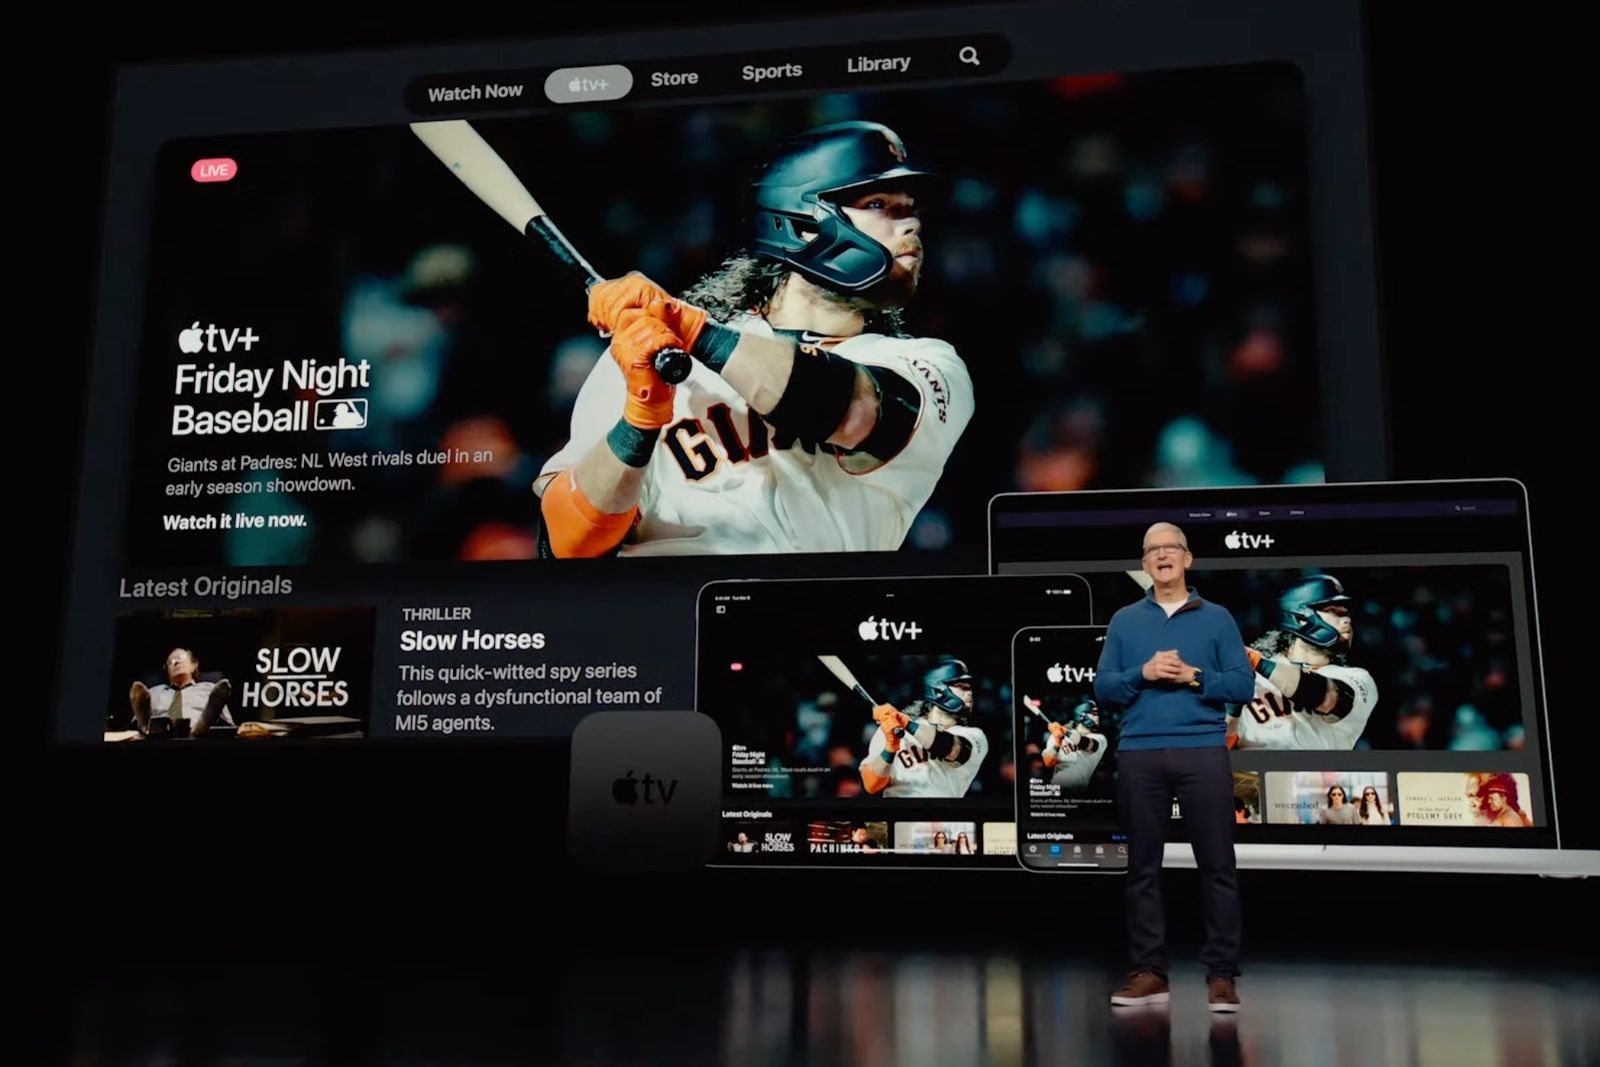 Apple TV Plus hits a home-run with MLB rights deal